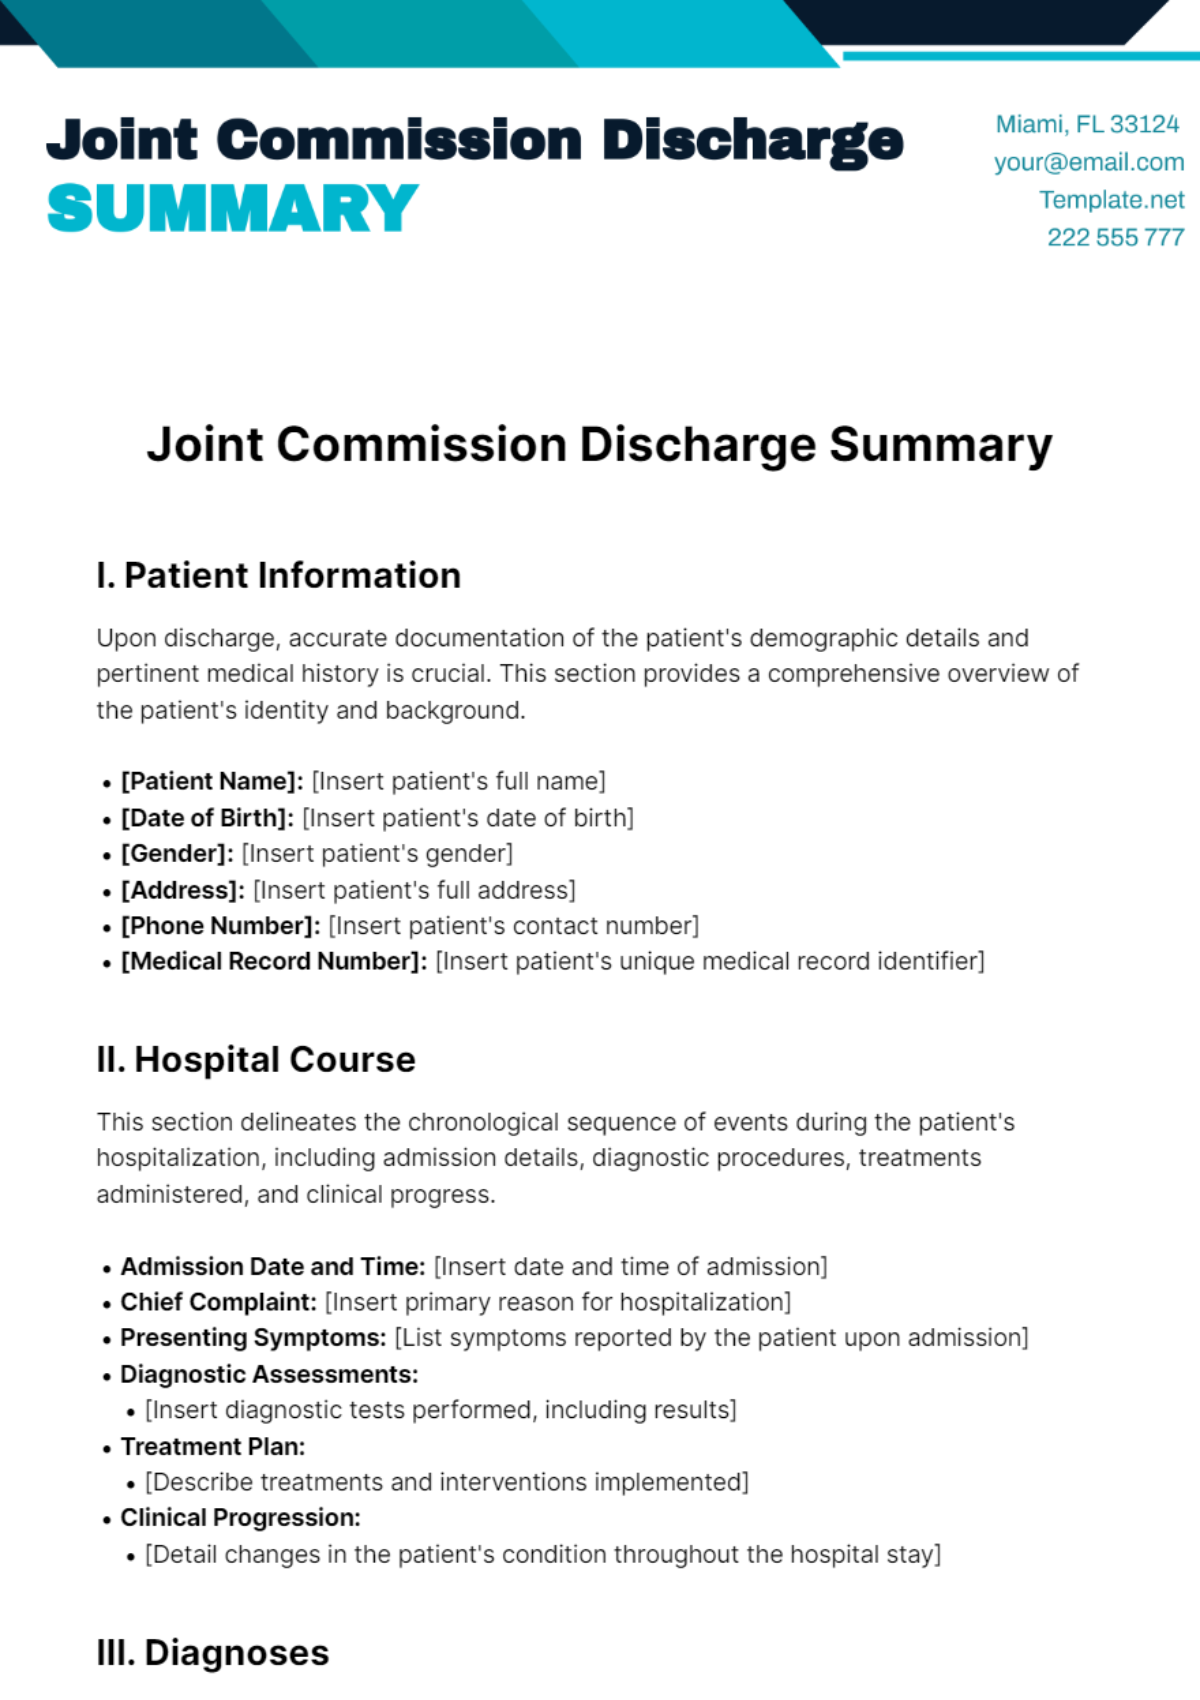 Free Joint Commission Discharge Summary Template 